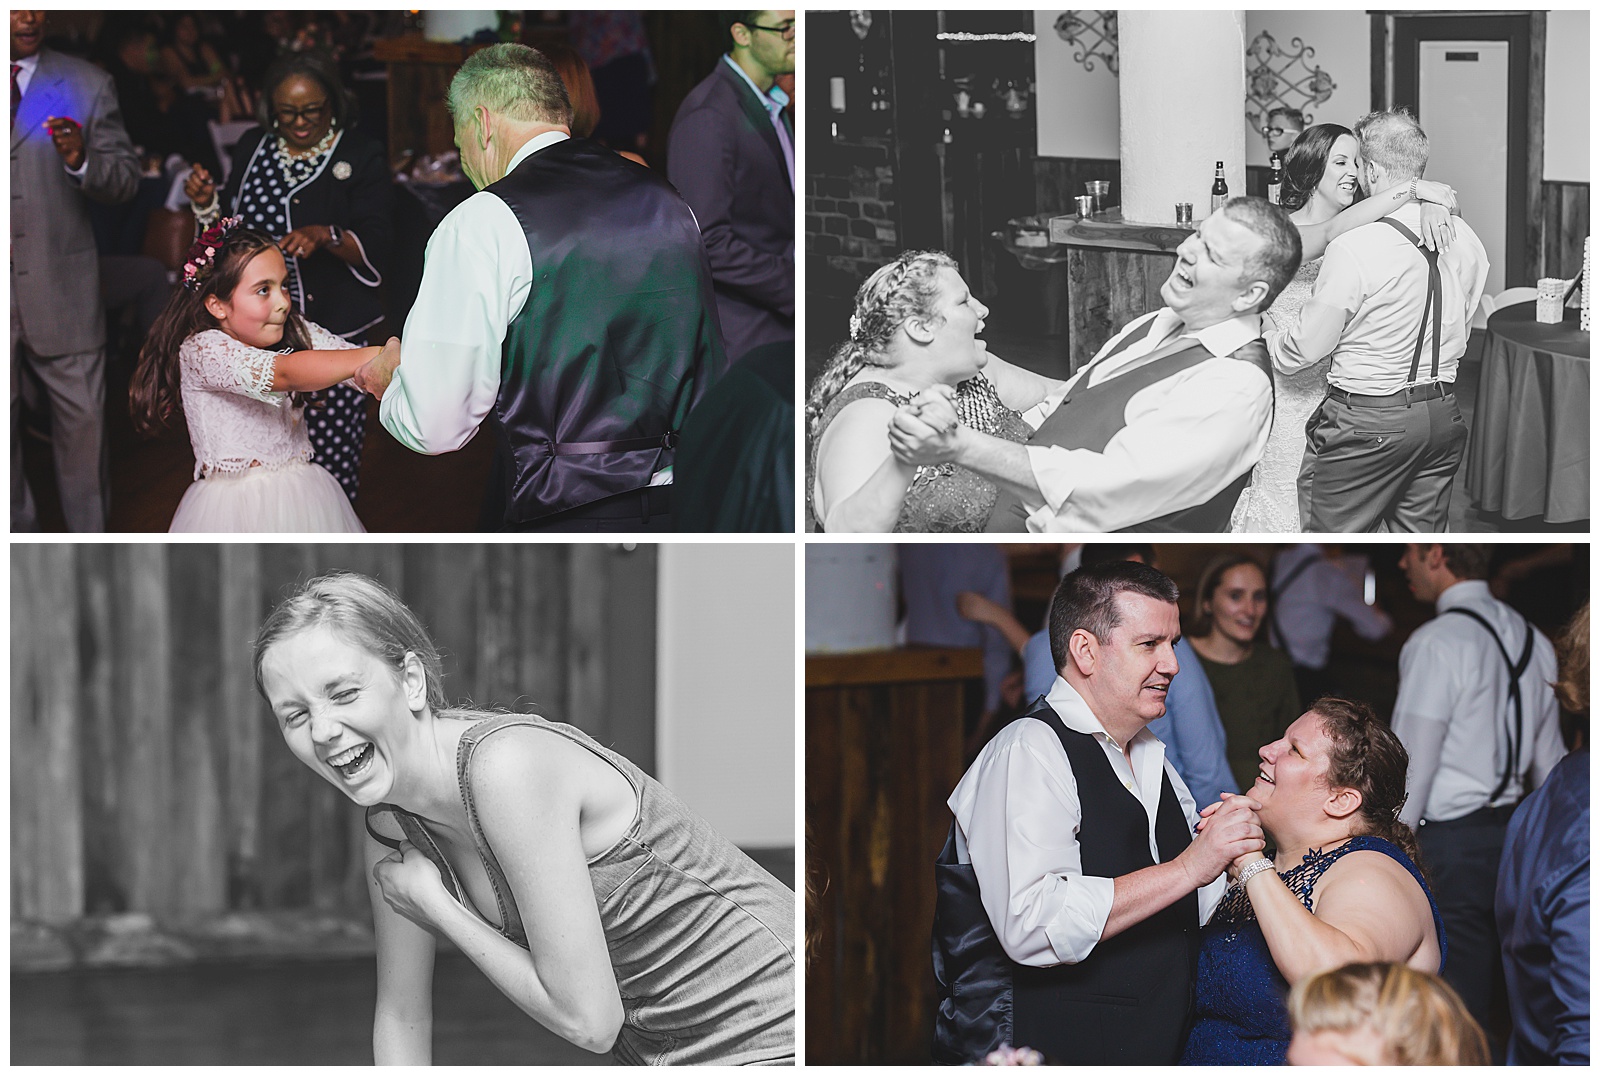 Wedding photography at Rumely Event Space by Kansas City wedding photographers Wisdom-Watson Weddings.